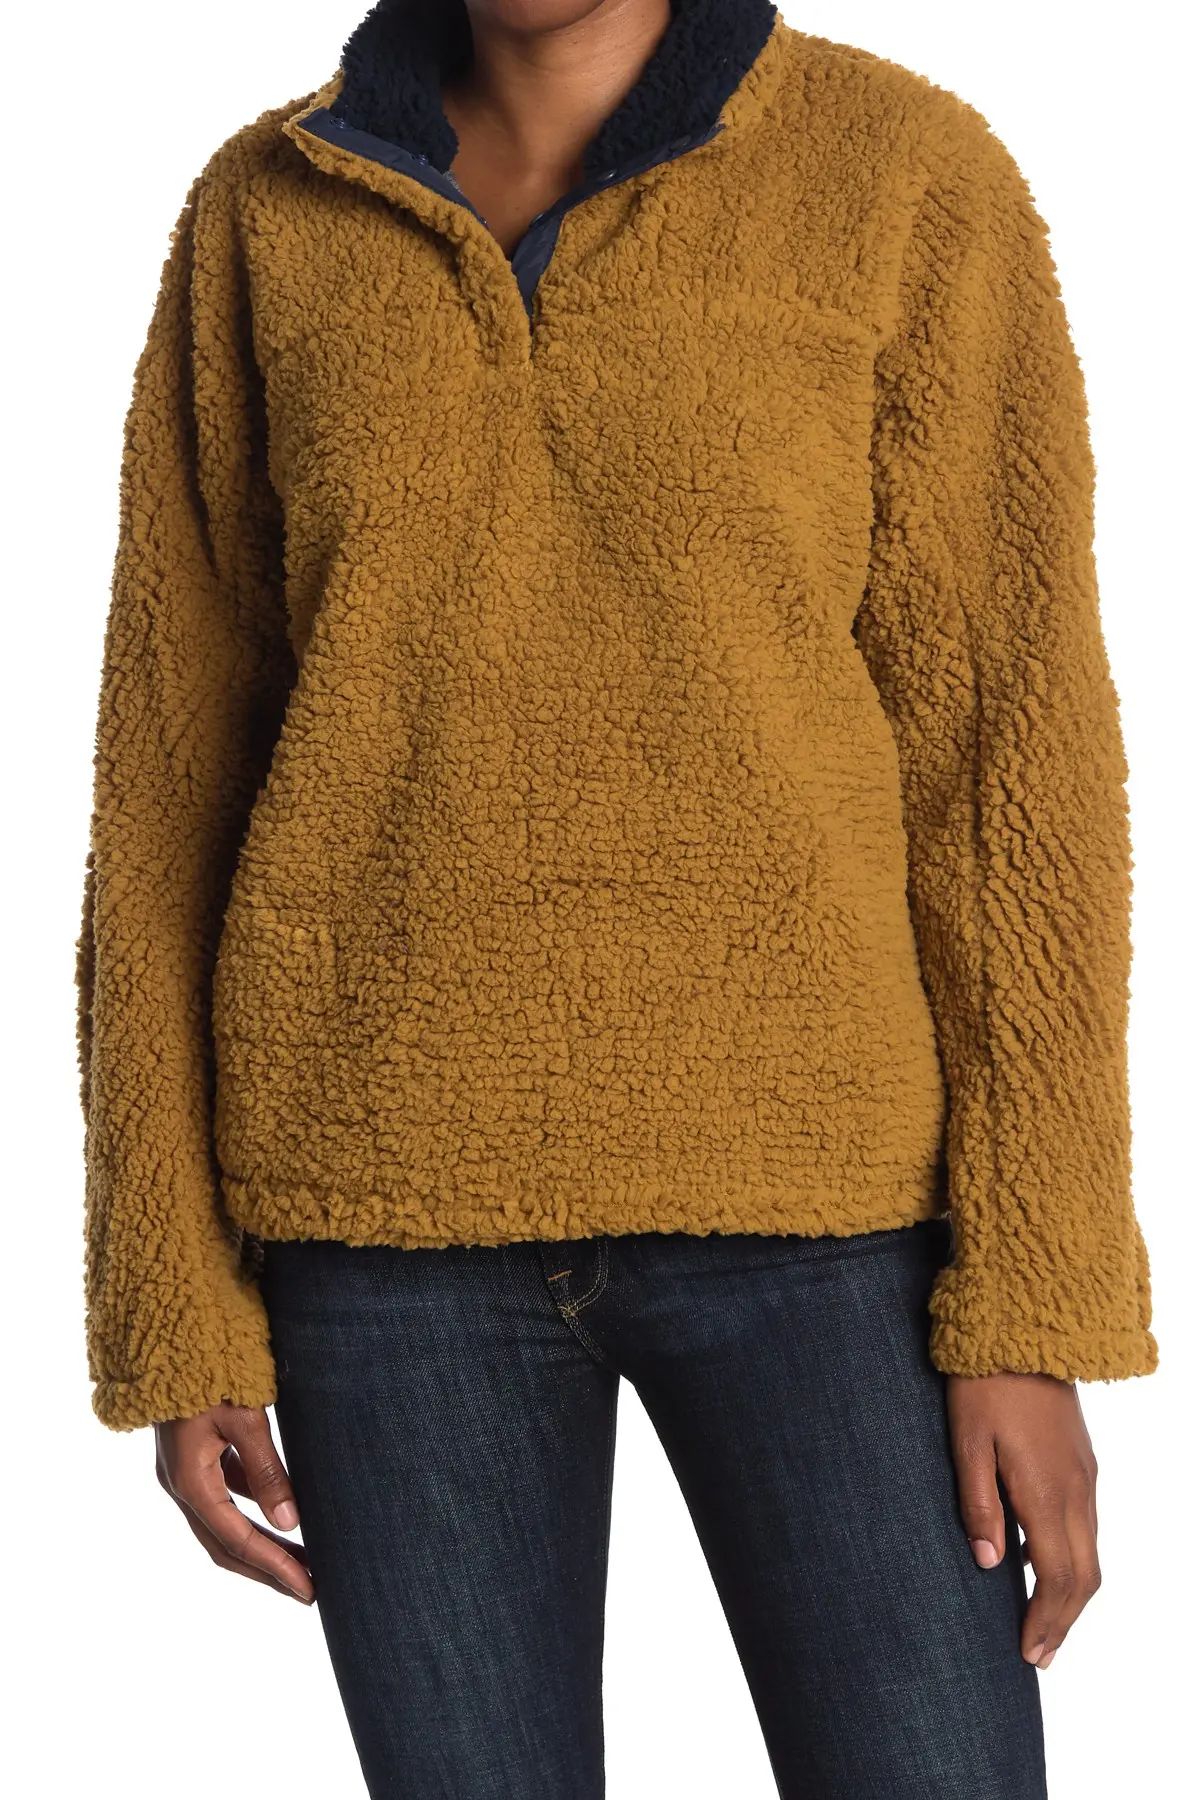 THREAD AND SUPPLY Daydream Faux Shearling Funnel Neck Pullover at Nordstrom Rack | Nordstrom Rack